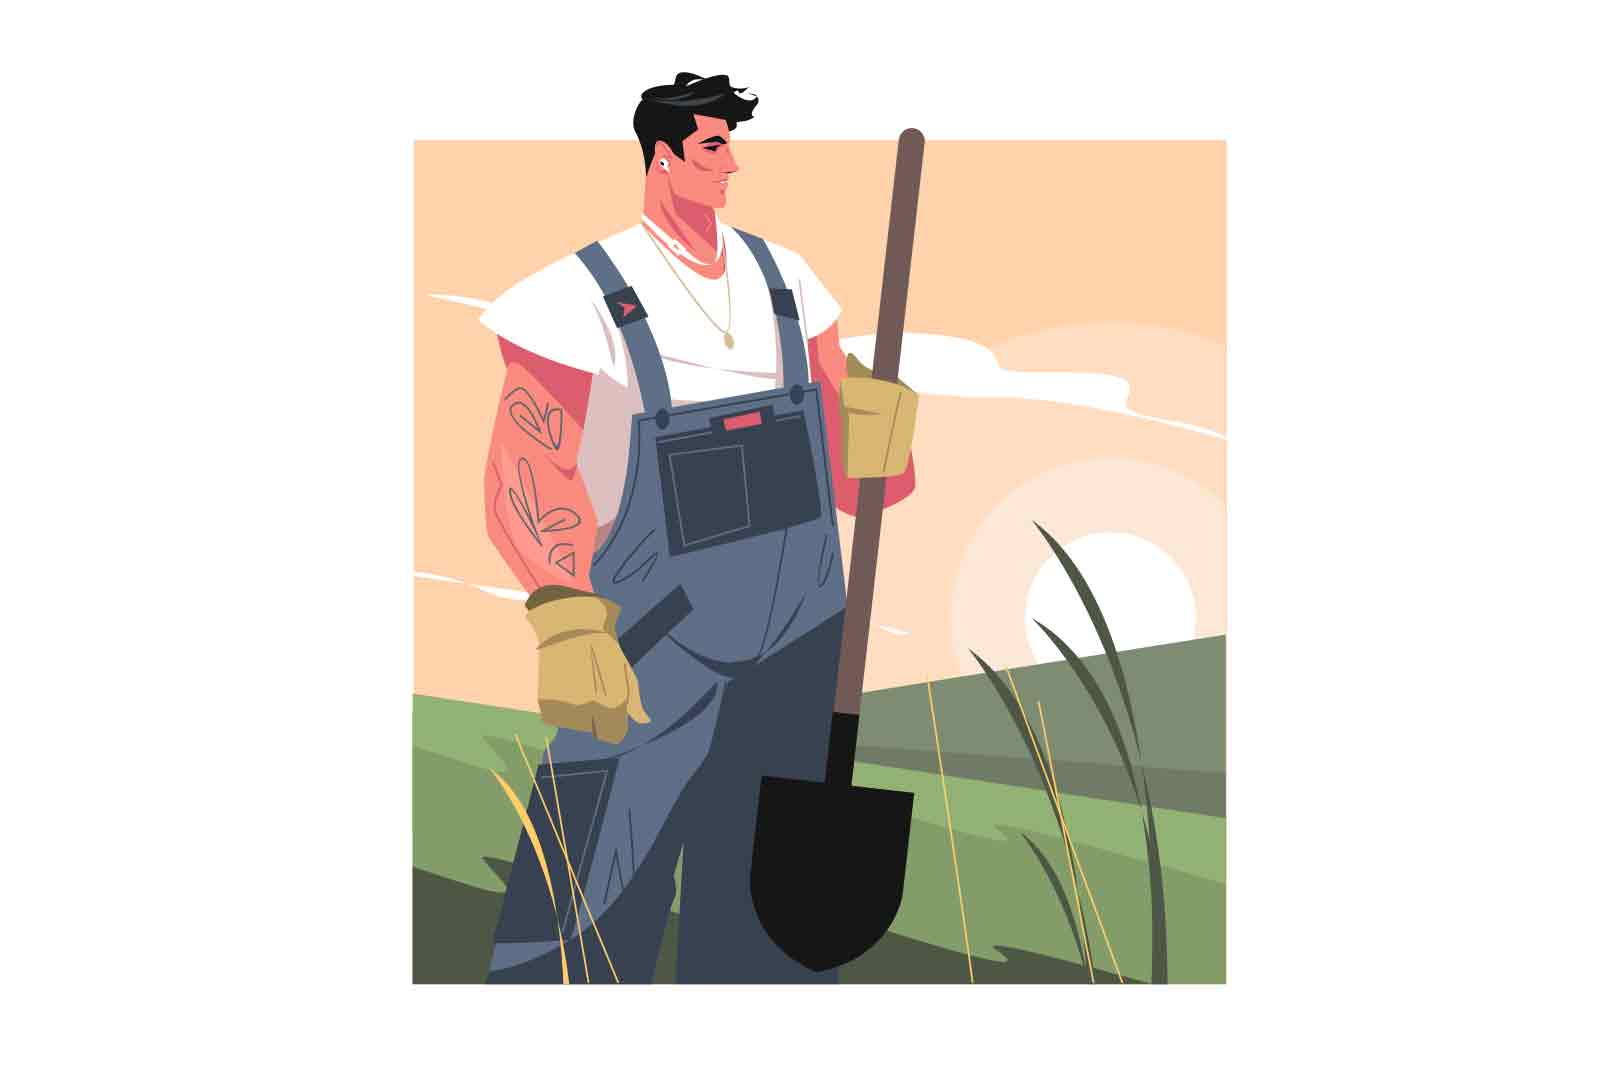 Agriculture Concept. Guy holding shovel in hands and standing in field in work clothes, vecto rillustration.